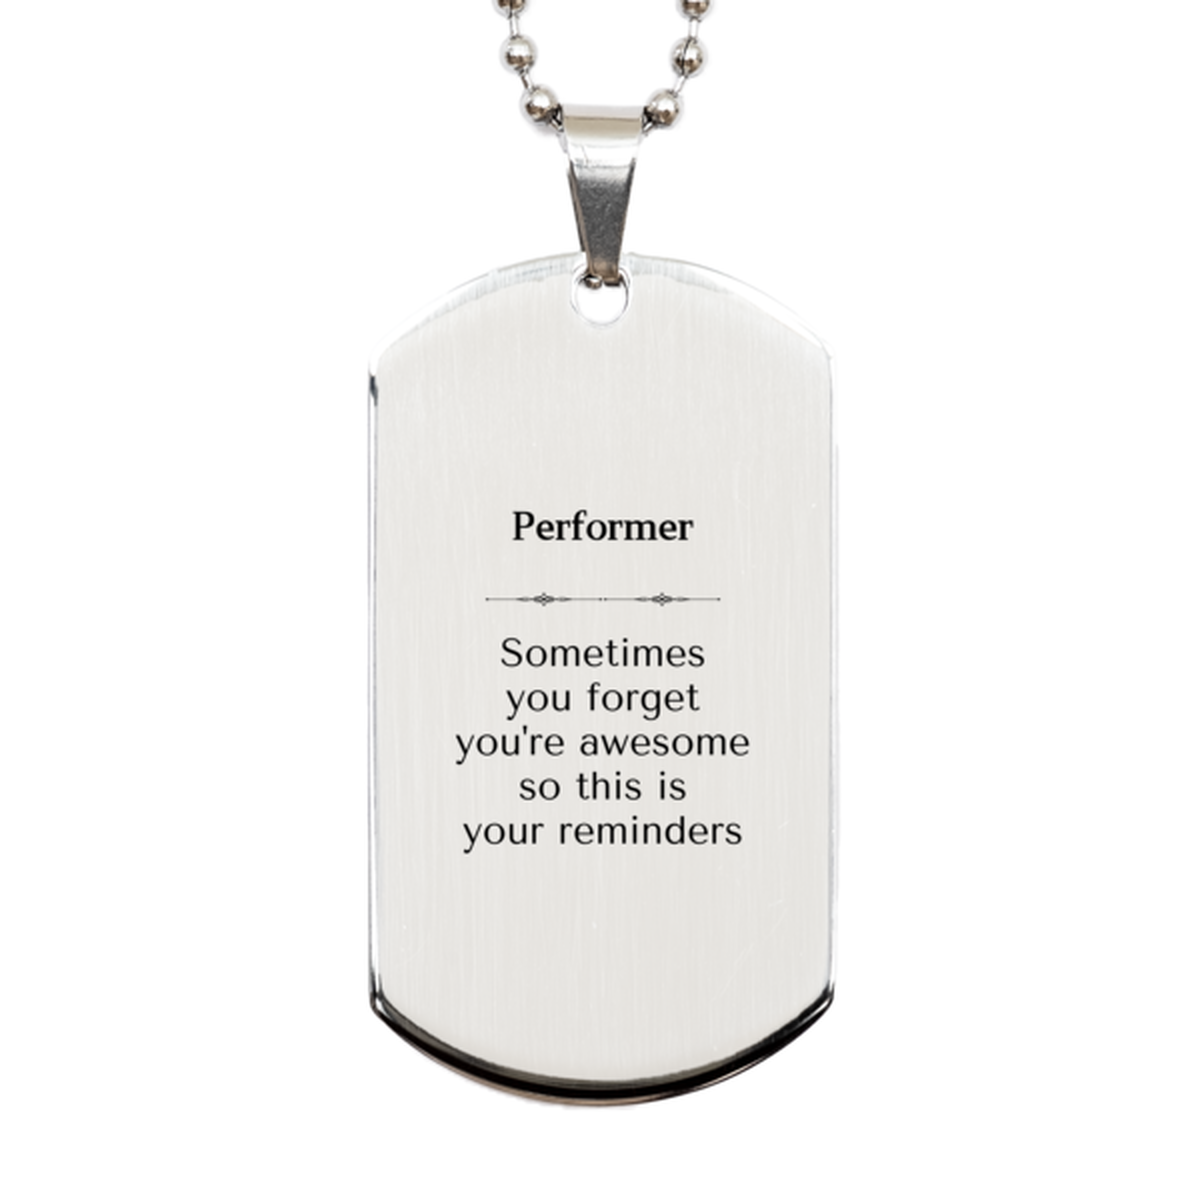 Sentimental Performer Silver Dog Tag, Performer Sometimes you forget you're awesome so this is your reminders, Graduation Christmas Birthday Gifts for Performer, Men, Women, Coworkers